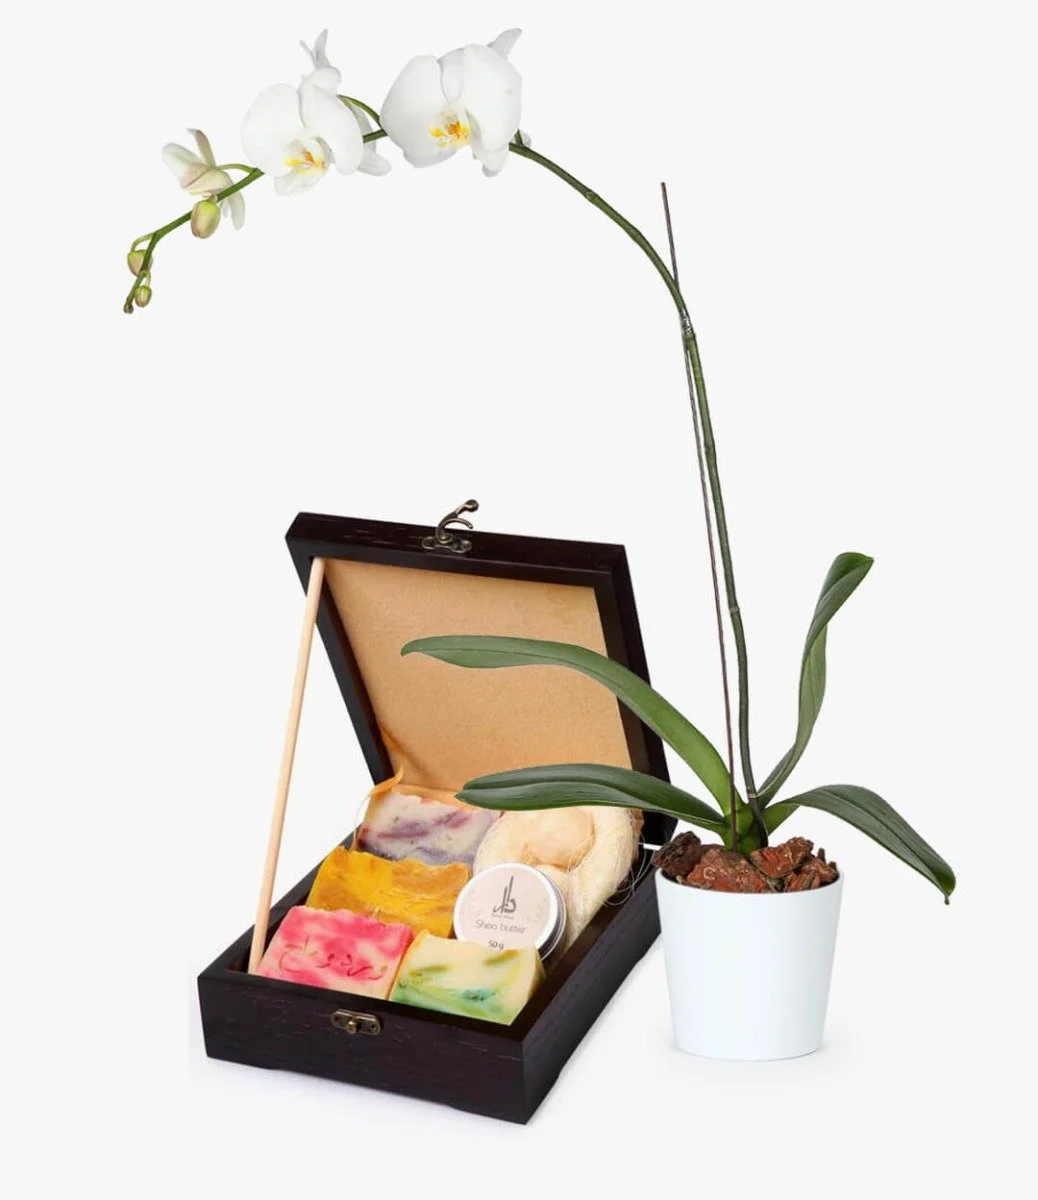 Organic Skincare Soaps Wooden Box & Orchid Bundle